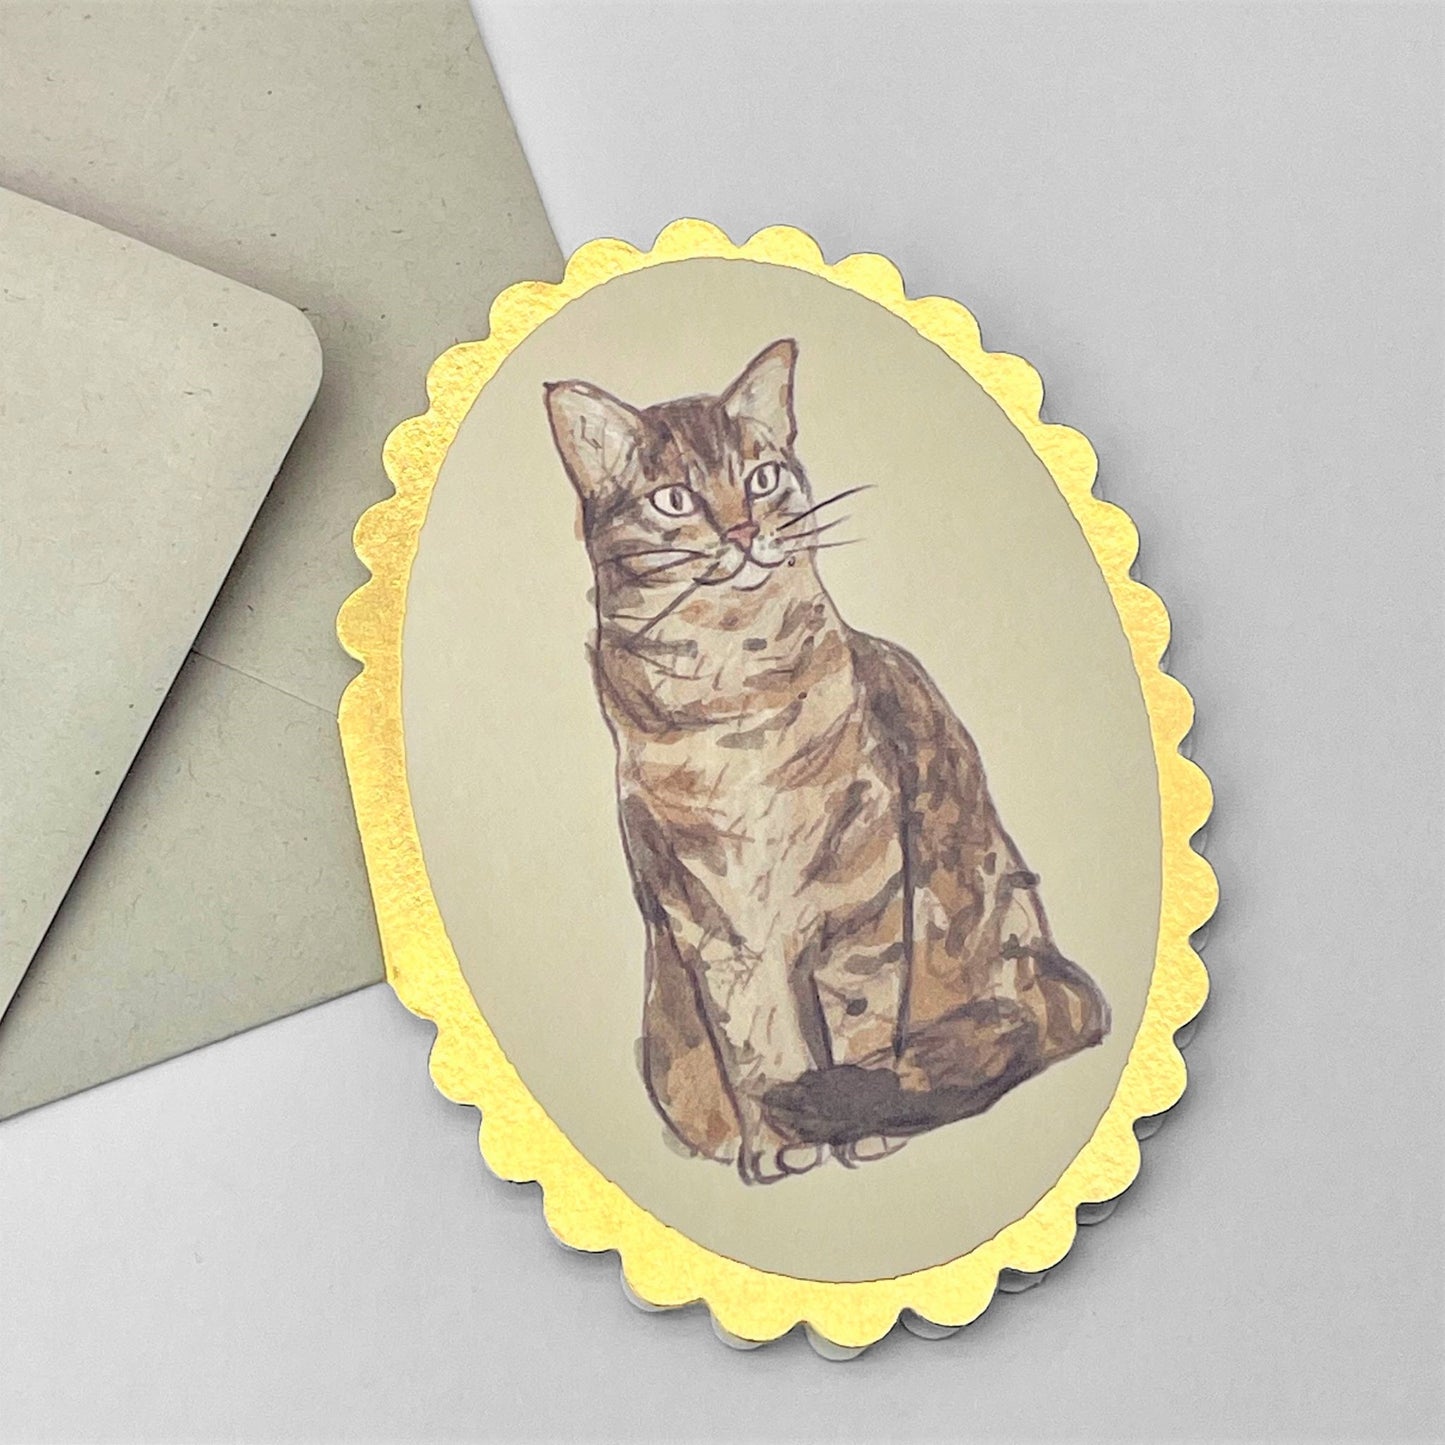 small oval greetings card with a drawing of a tabby cat. the card has a gold foiled scalloped edge. By Wanderlust. With envelope